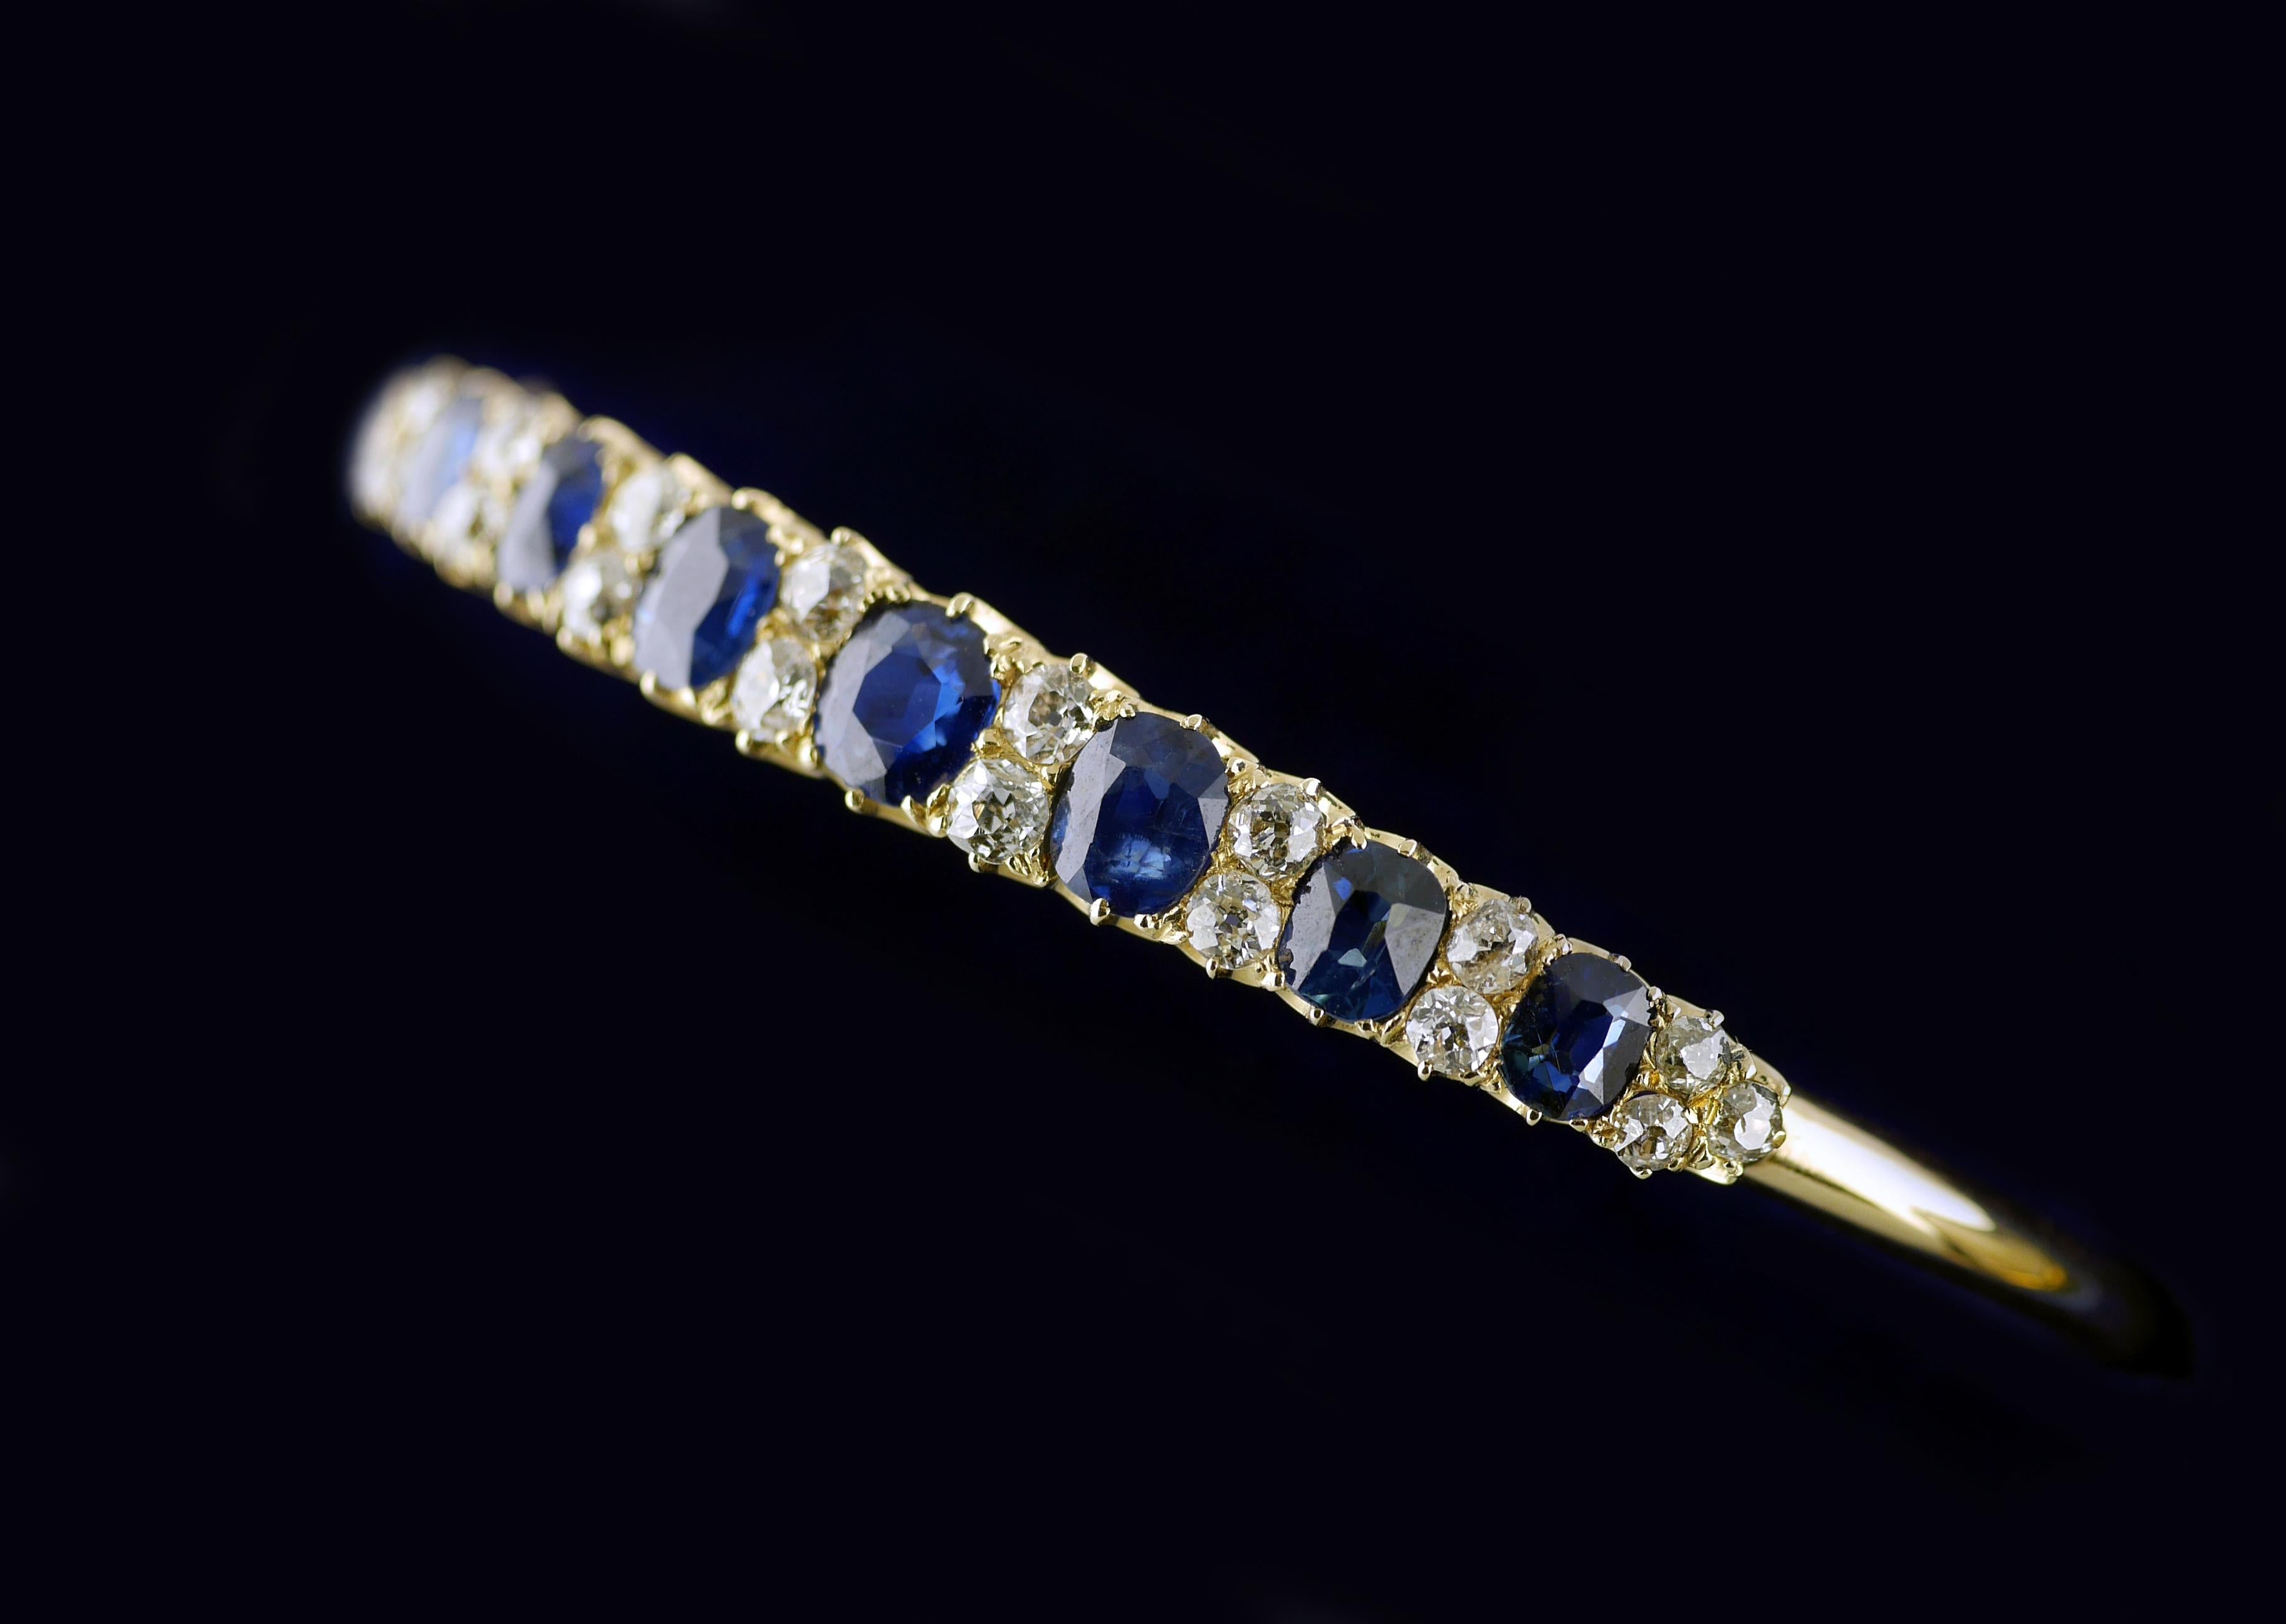 Seven natural, untreated blue sapphires in a period, Victorian bangle (bracelet) mounted with white diamonds dating from Circa 1860.

18ct yellow gold bangle set with 7 extremely well matched, natural untreated Sapphires with a total weight of 4.5ct